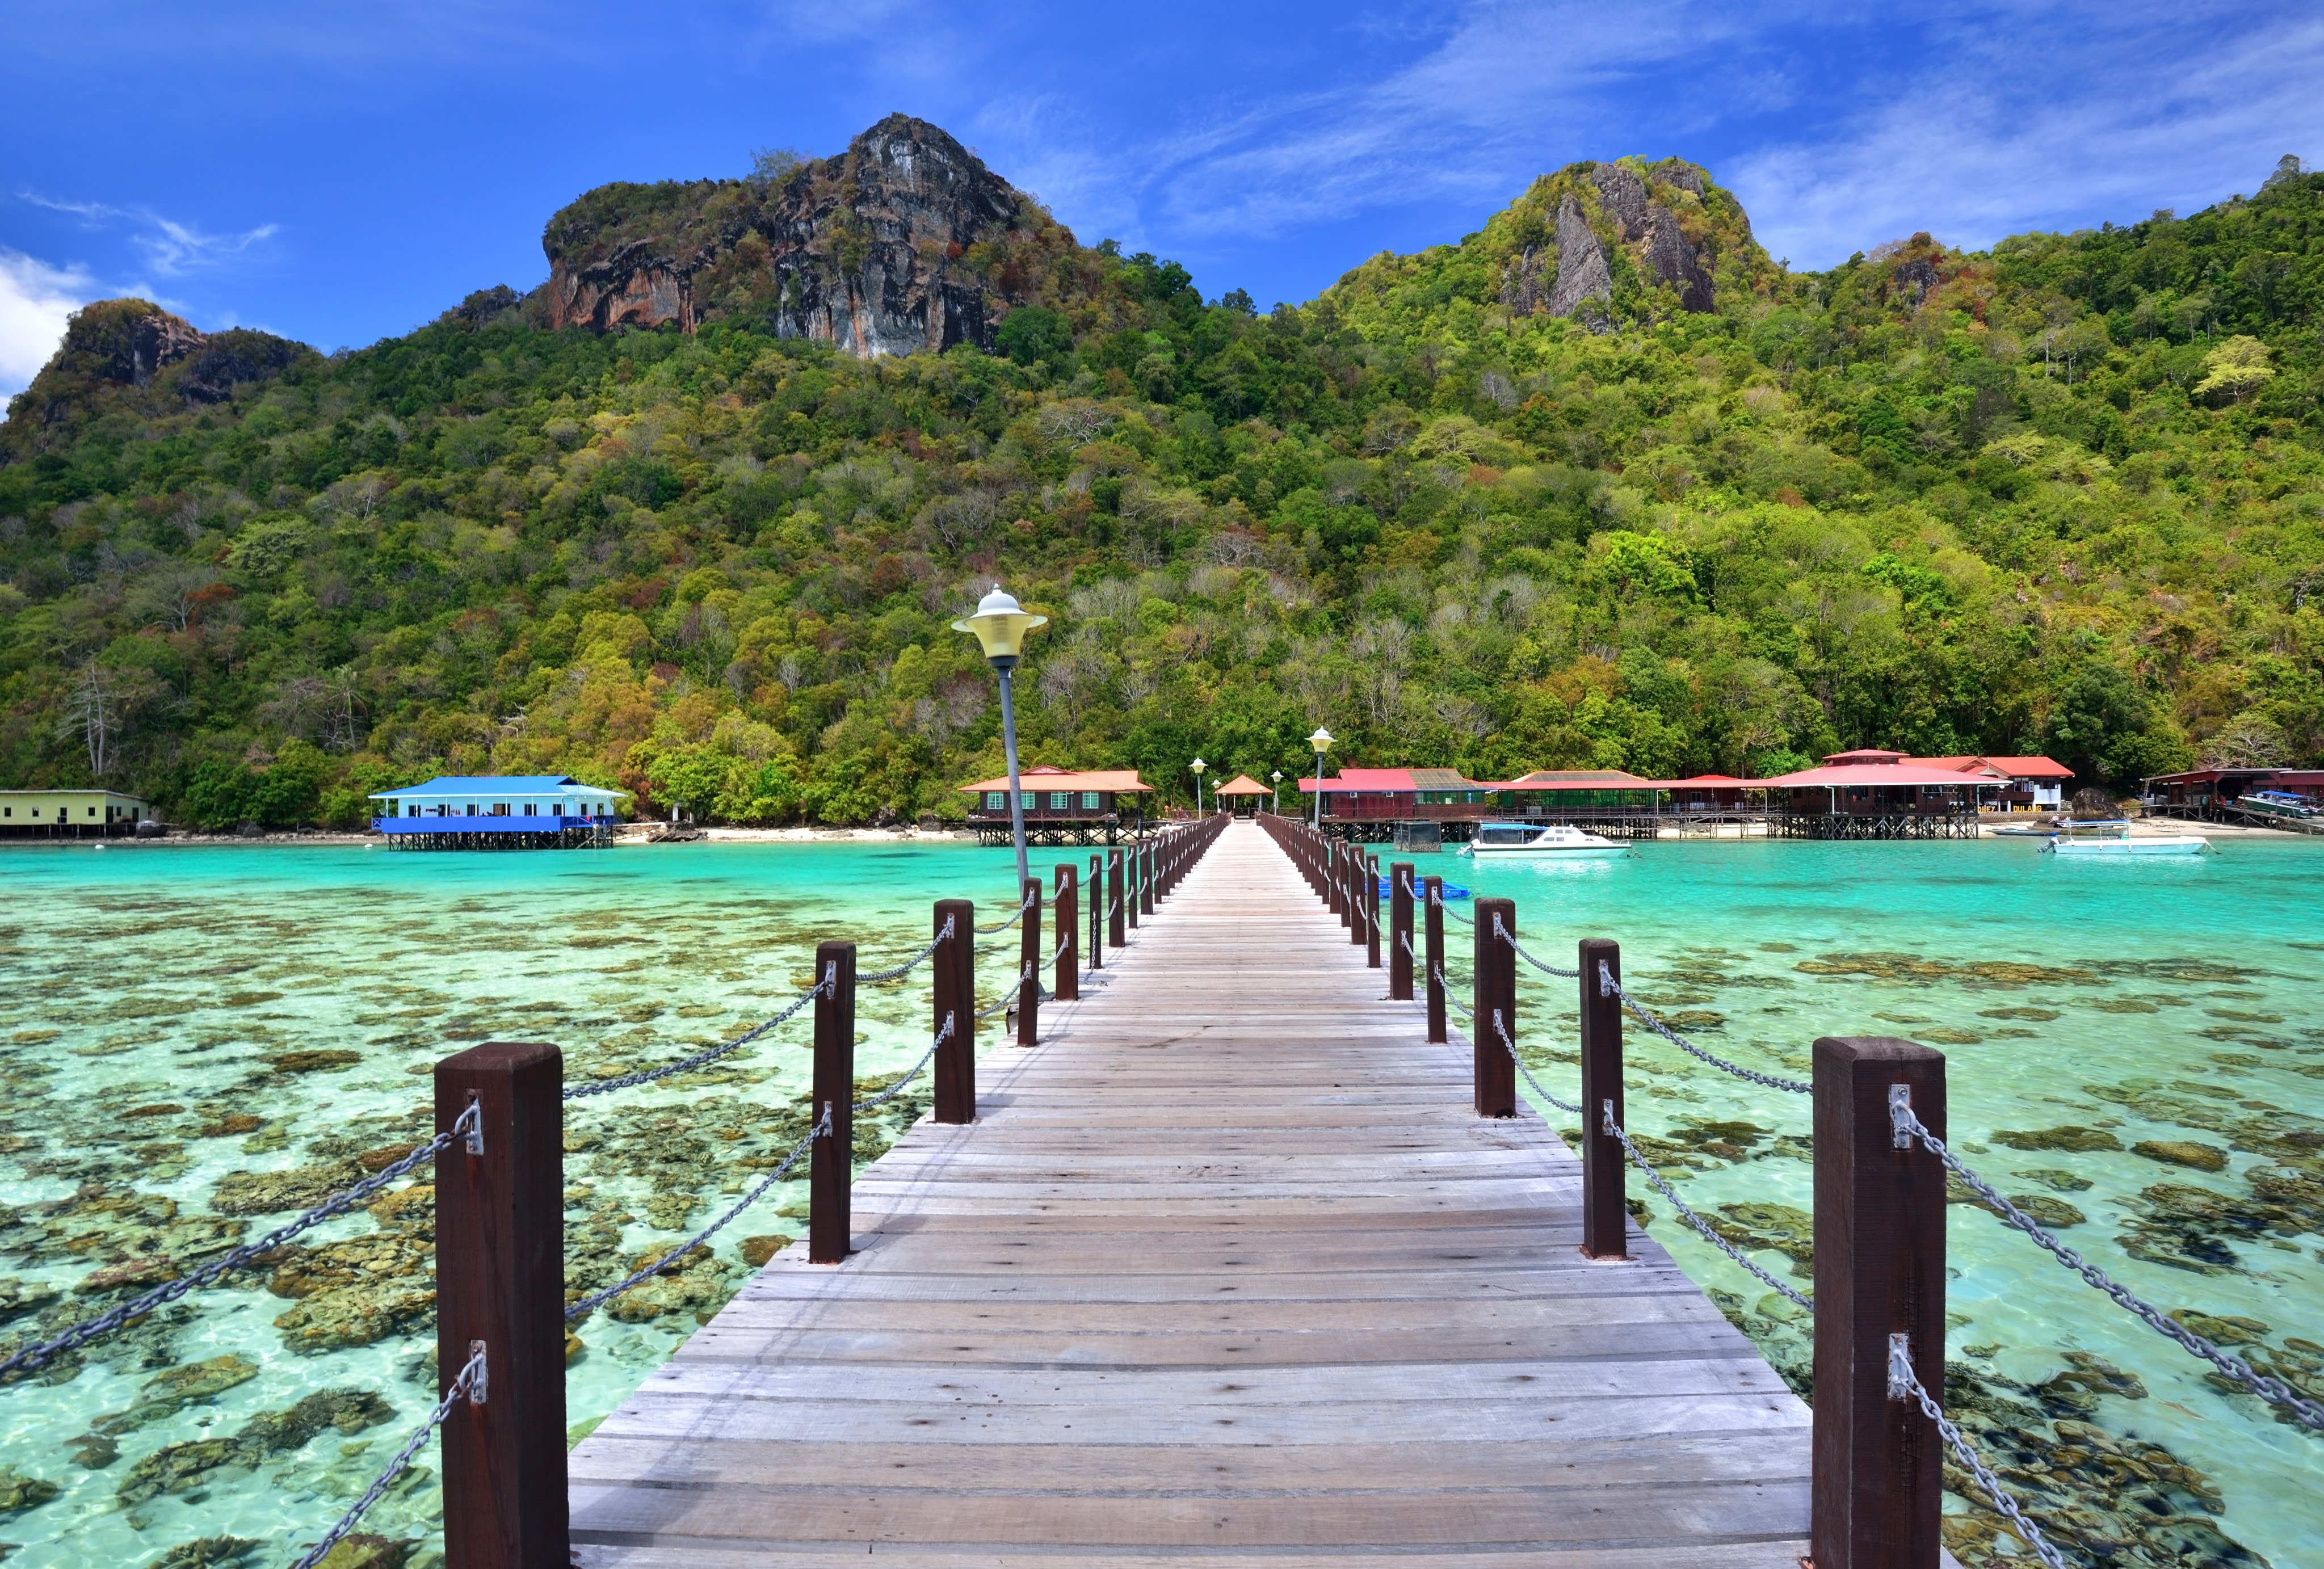 The Sulu Sultanate leased Sabah to a British company in 1878 and the Borneo state was later absorbed into Malaysia. Photo: Shutterstock